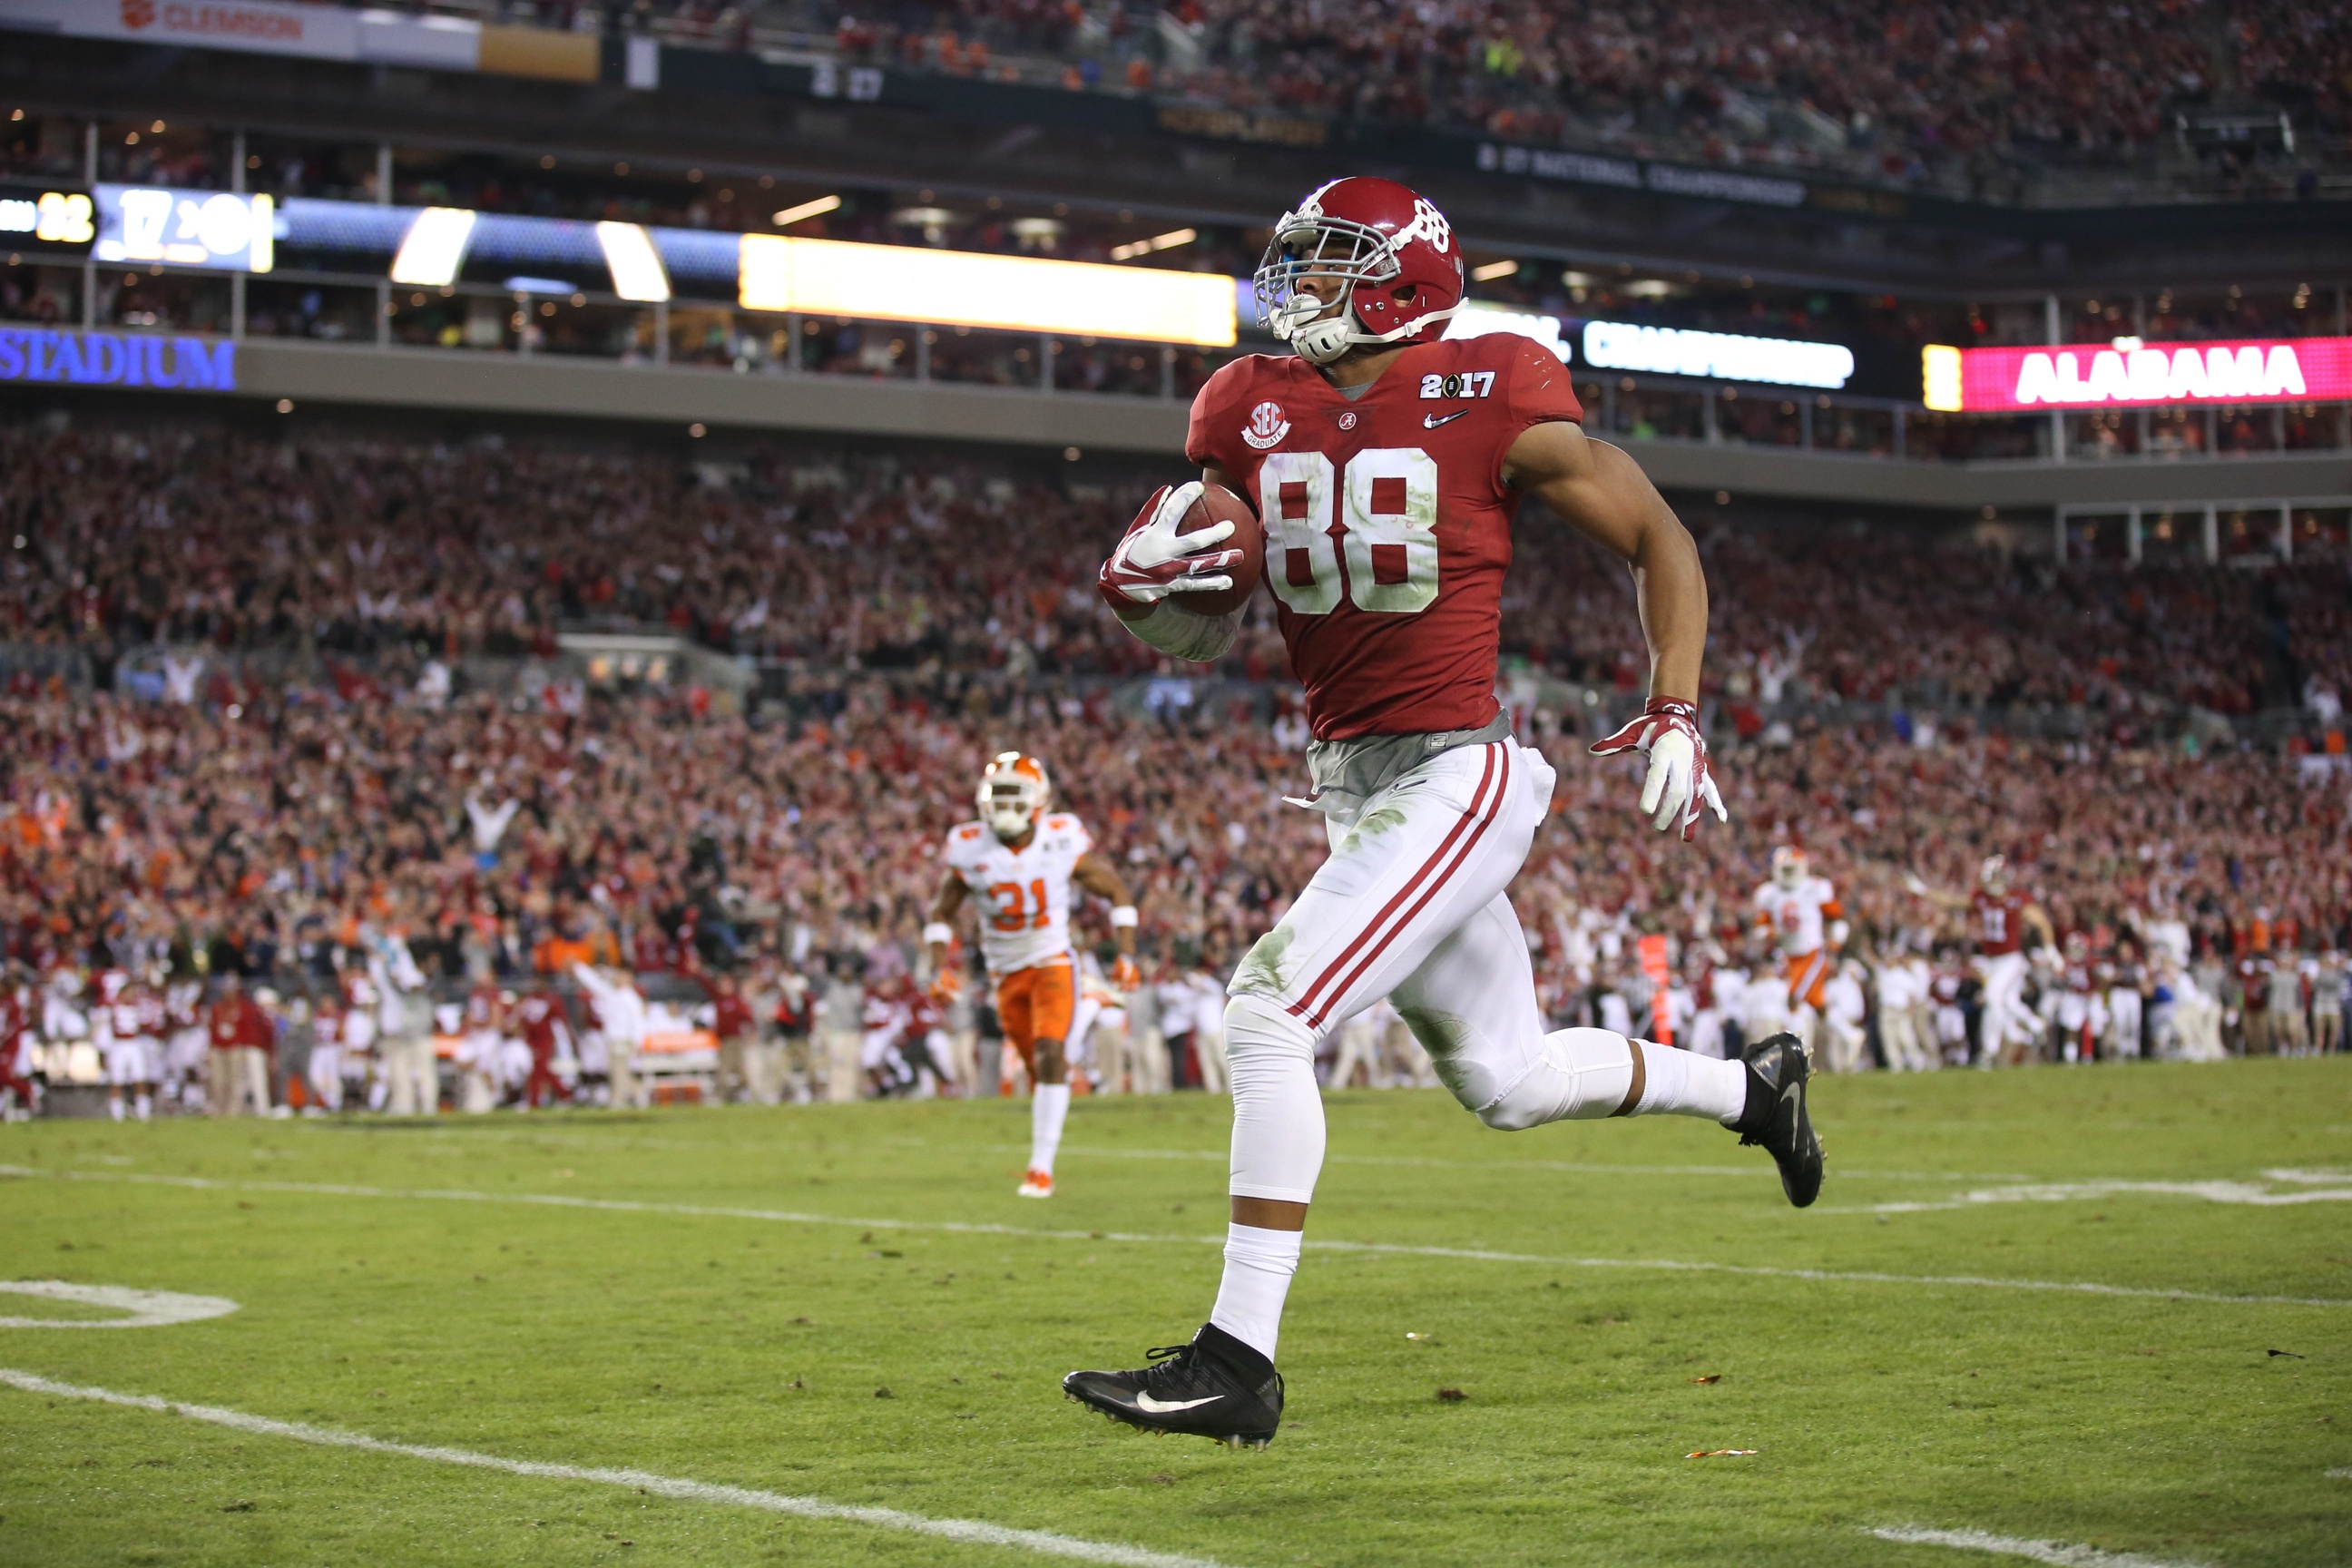 Jan 9, 2017; Tampa, FL, USA; Alabama Crimson Tide tight end O.J. Howard (88) catches a 68 yard touchdown pass against the Clemson Tigers during the third quarter in the 2017 College Football Playoff National Championship Game at Raymond James Stadium. Mandatory Credit: Matthew Emmons-USA TODAY Sports